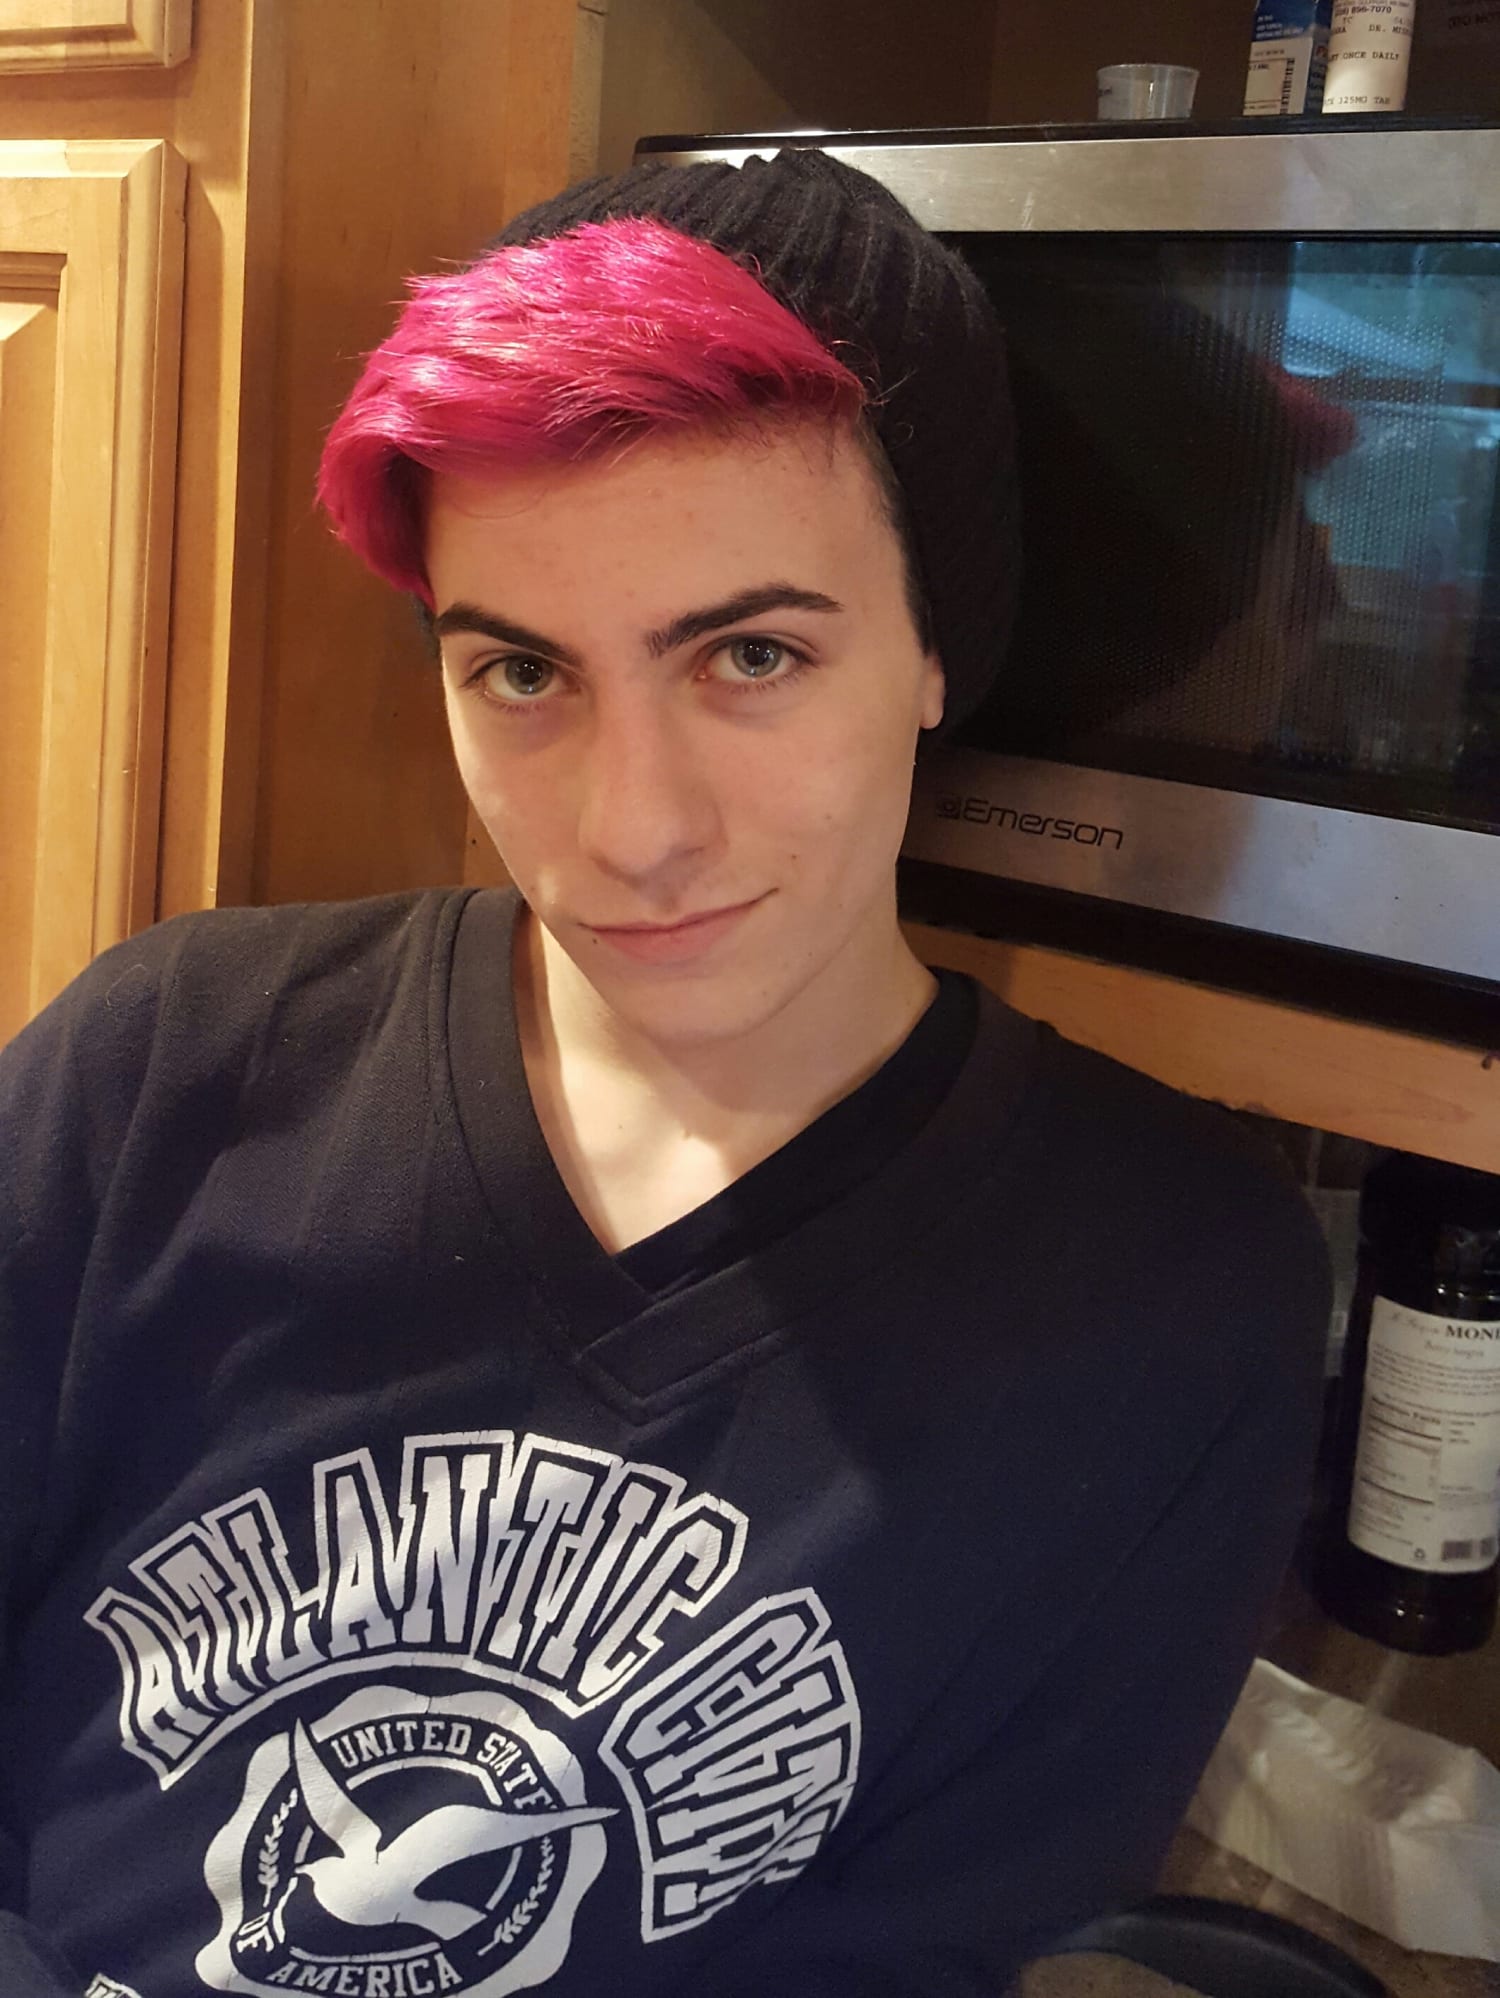 Male student suspended for pink hair fights to change school policy